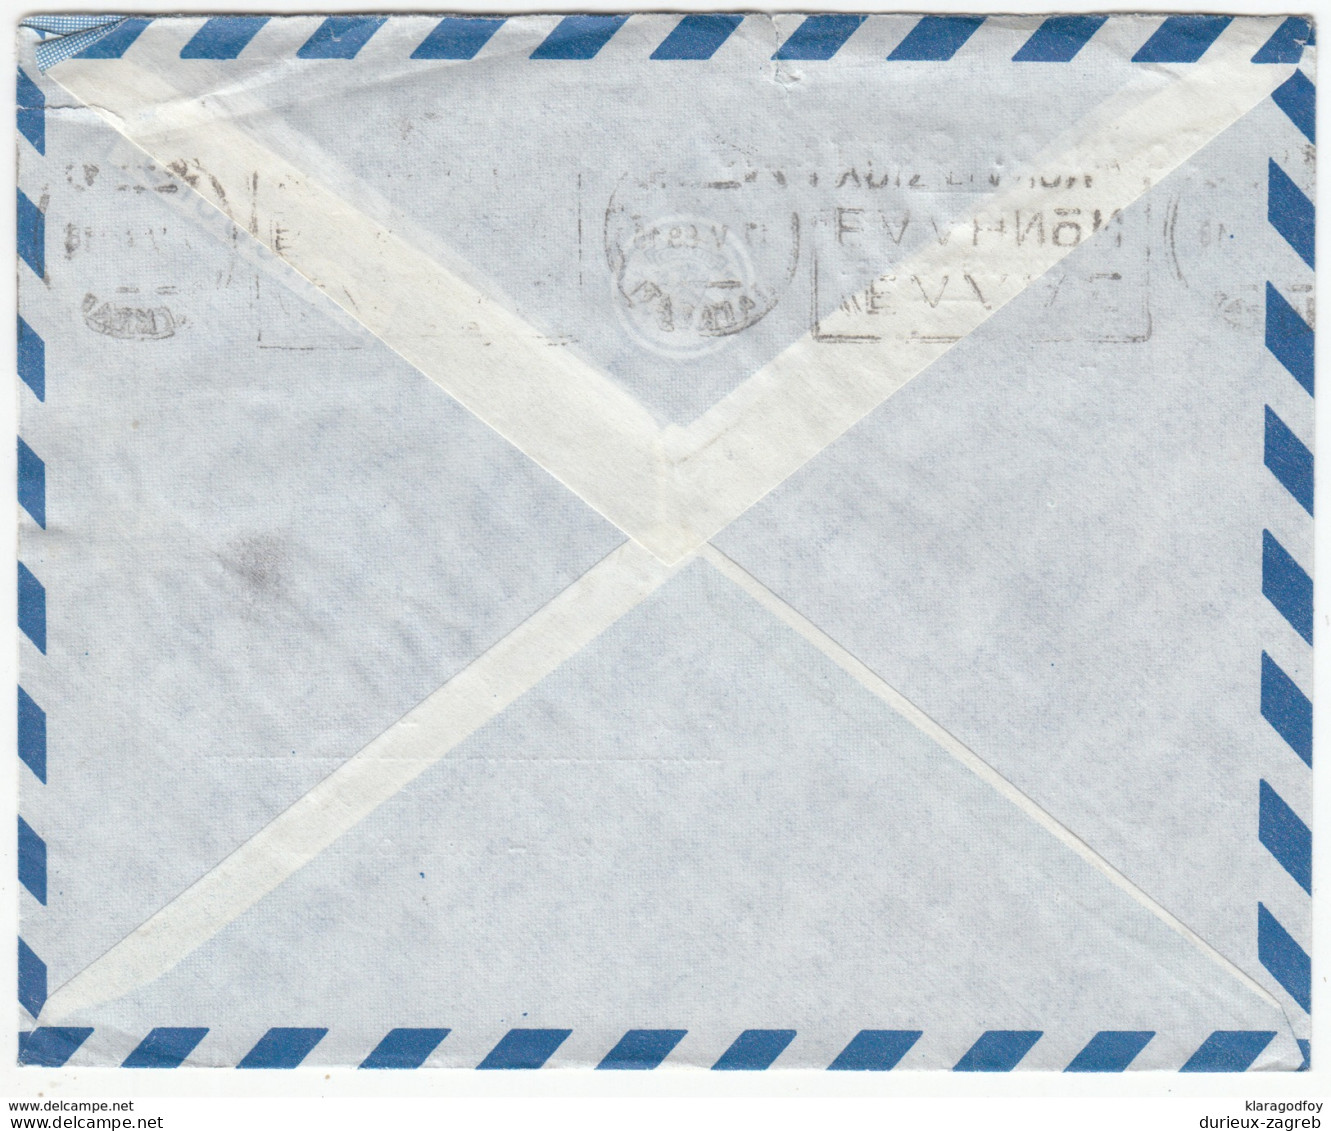 Greece, John D. Cottakis Company Airmail Letter Cover Travelled 1969 B171025 - Covers & Documents